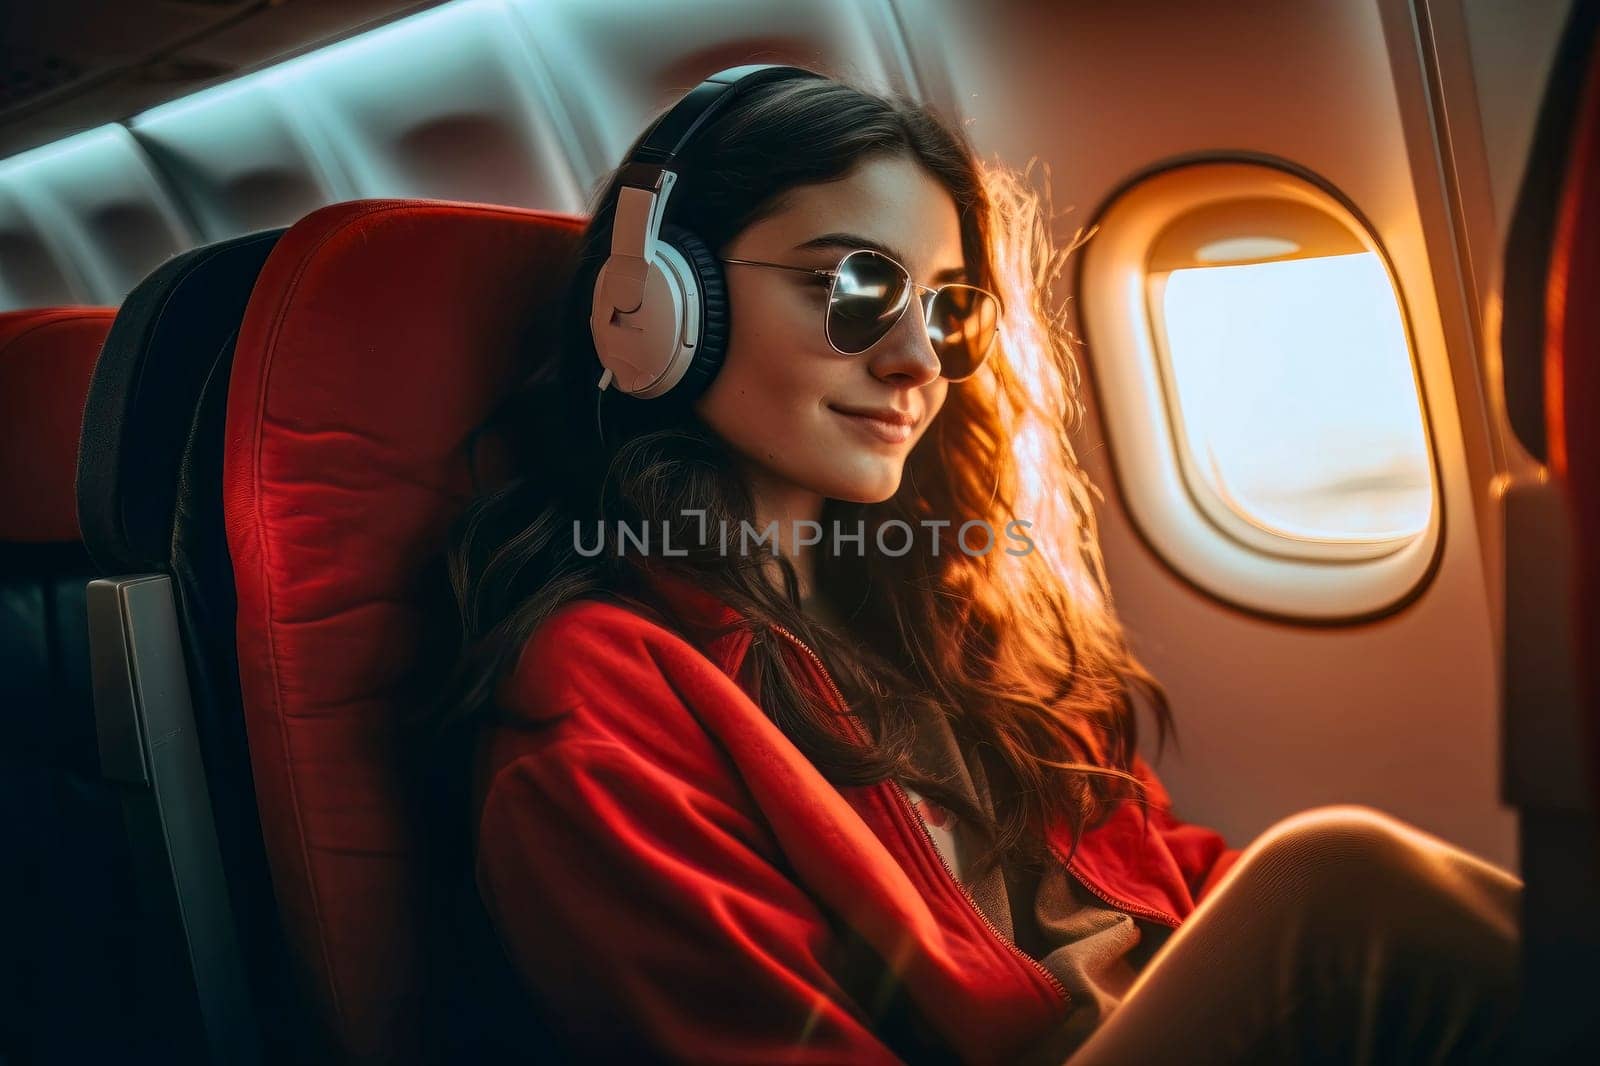 Happy Girl with Headphones Traveling by Air: Music and Adventure by pippocarlot